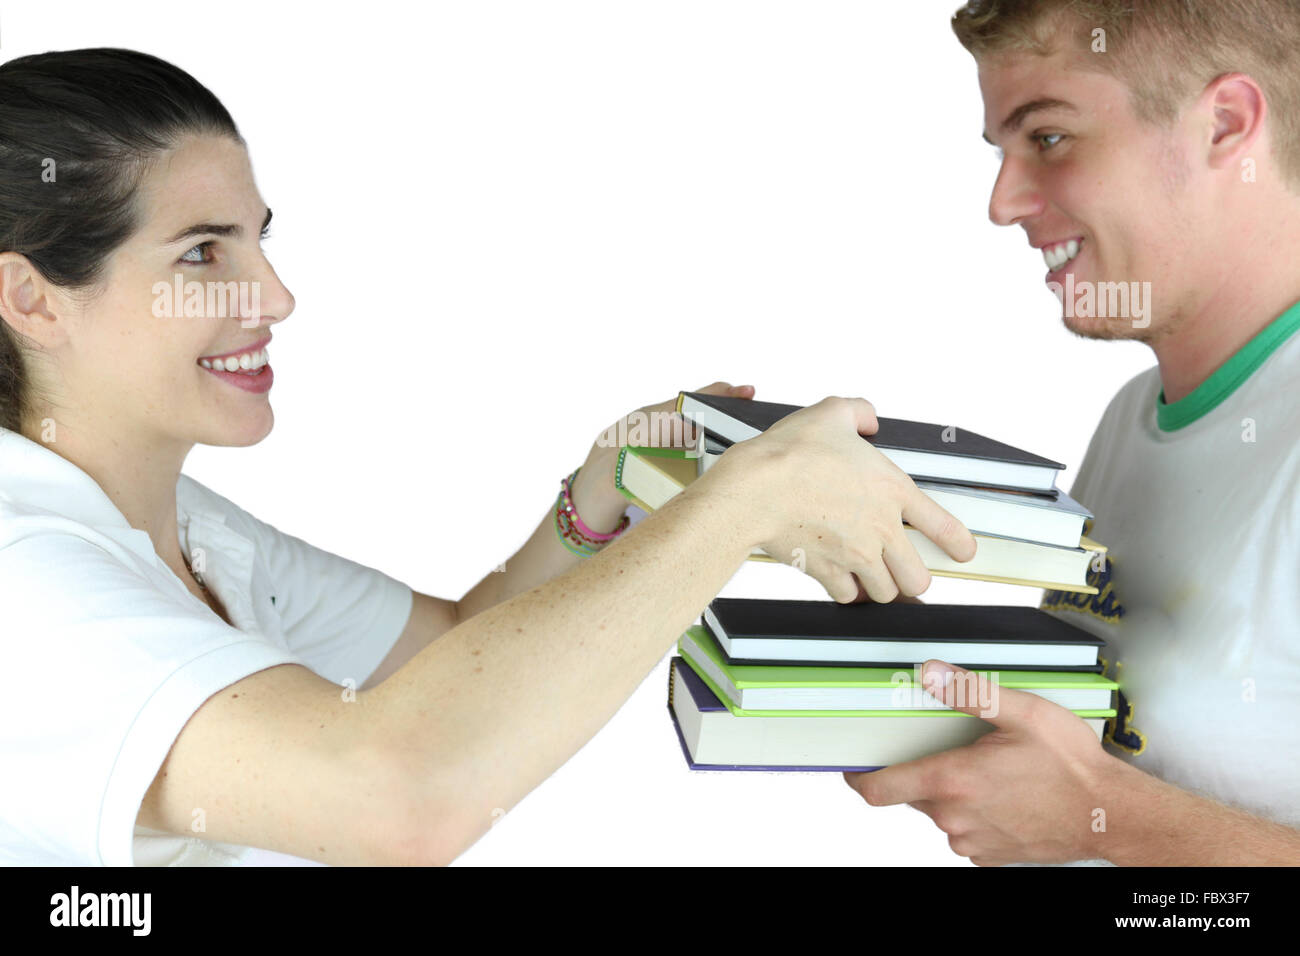 Can you do my homework ? Stock Photo